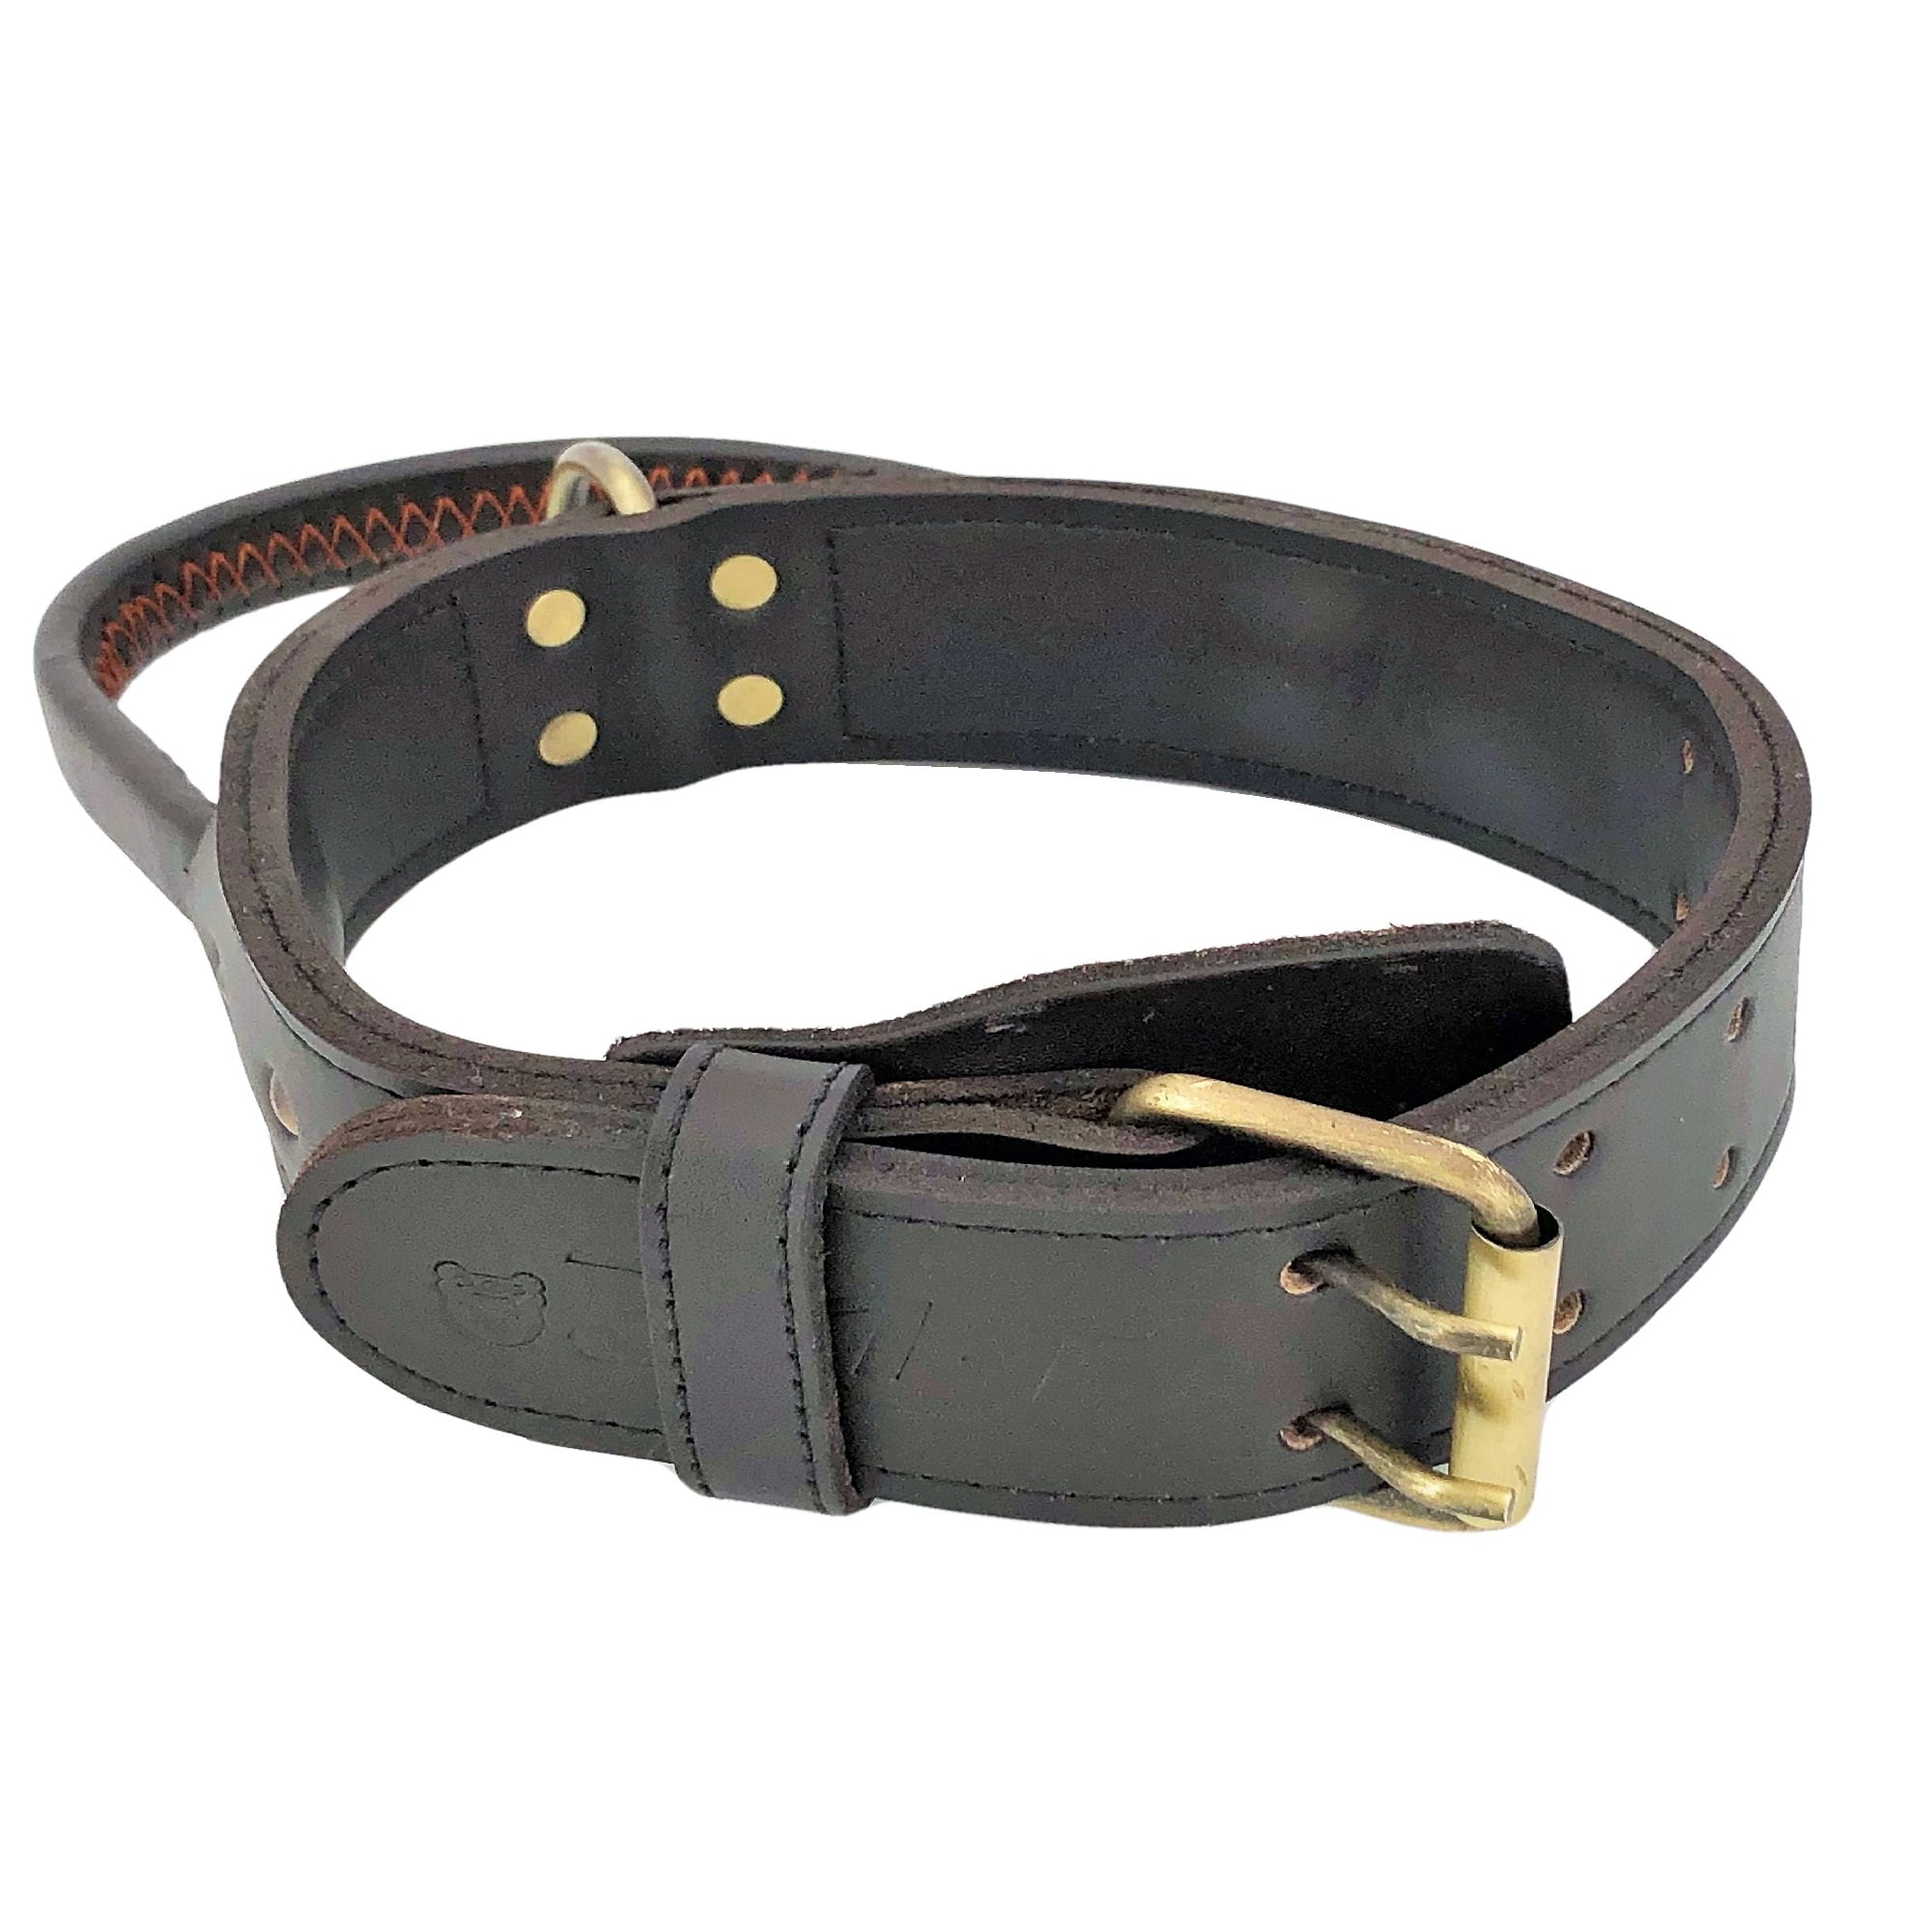 Thankspaw Leather Dog Collar Soft & Durable Strong Waterproof Collars  Adjustable for Small Medium Large Dogs Brown M